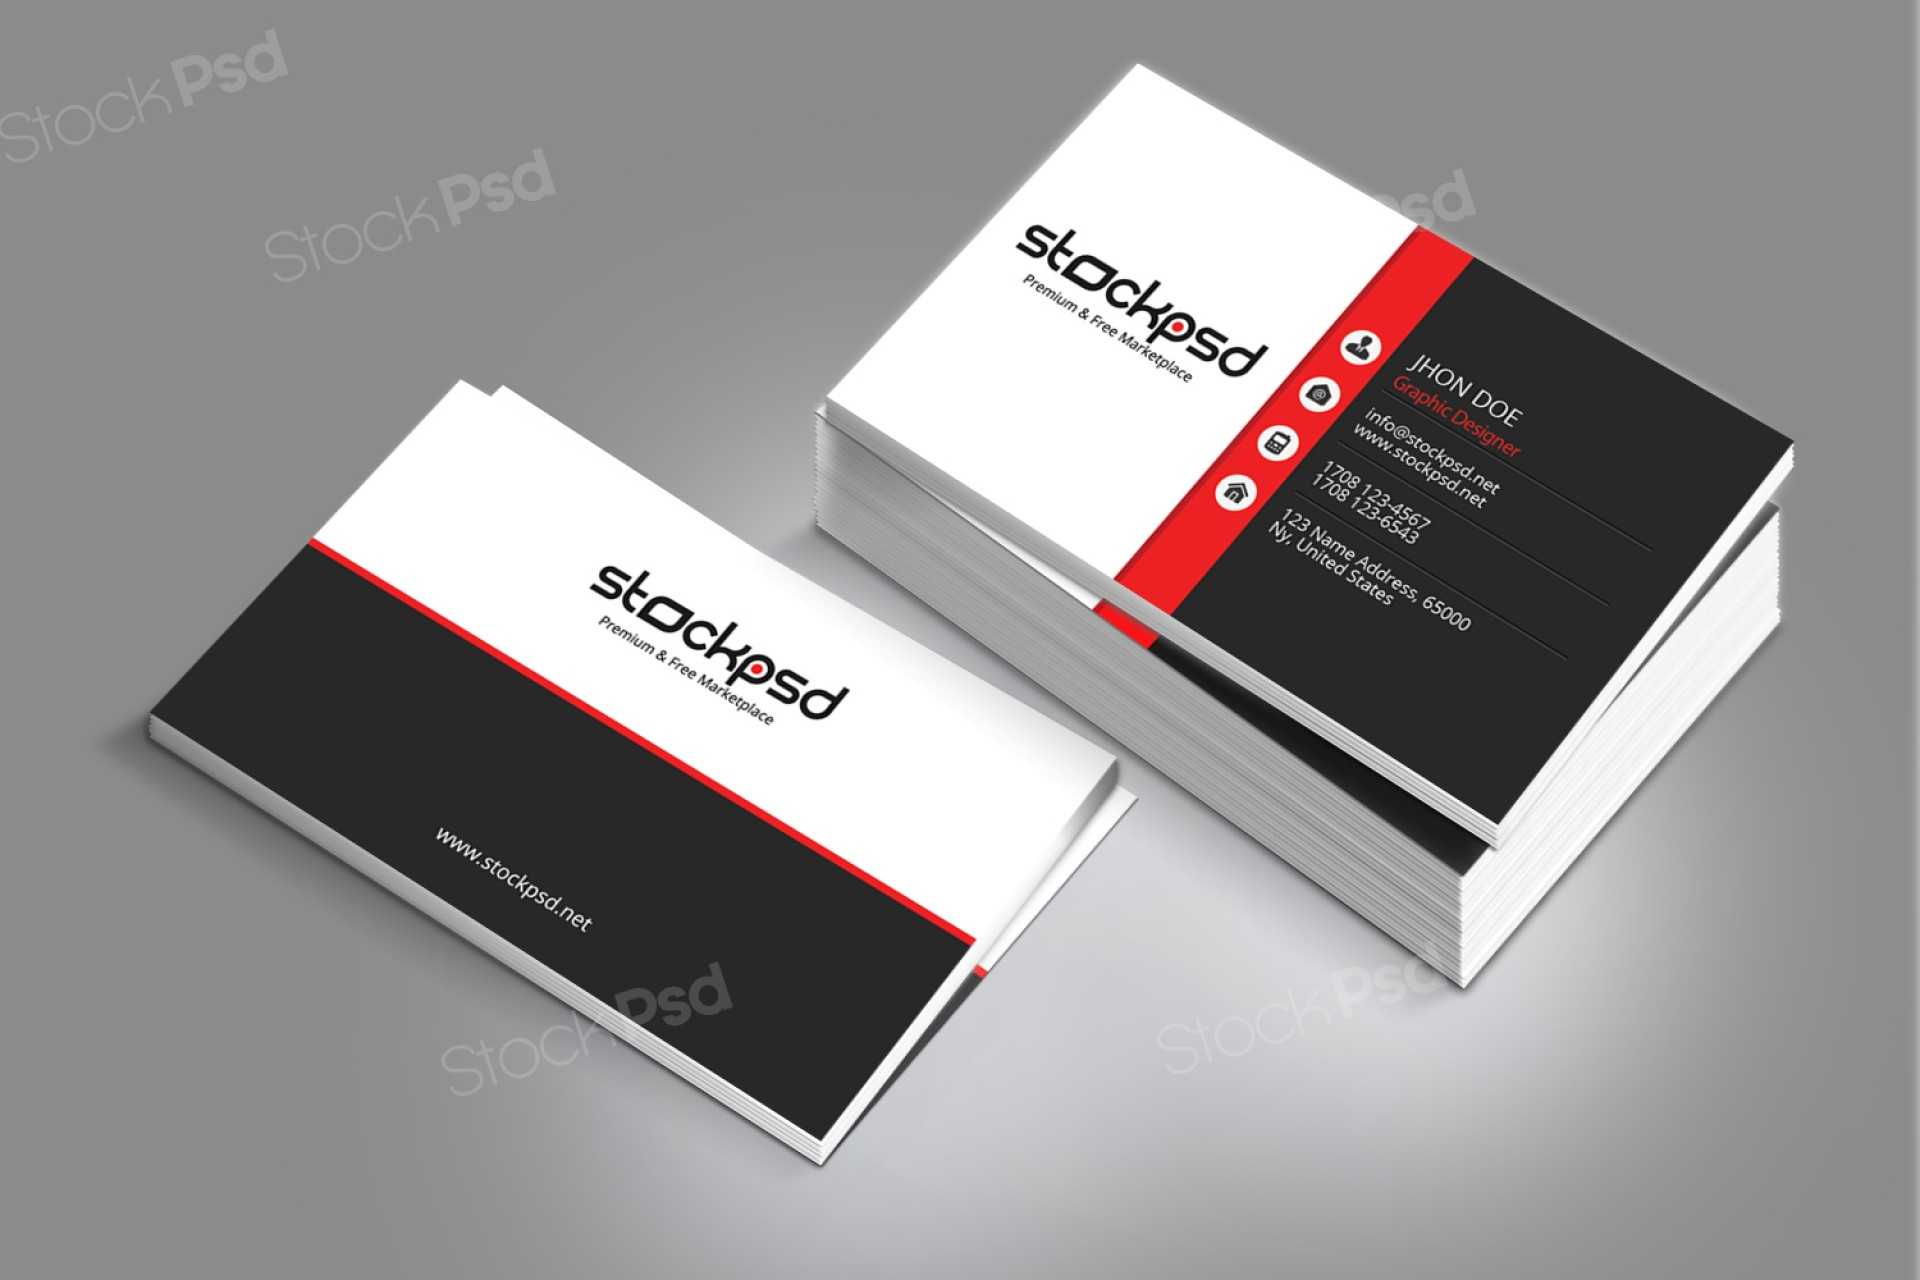 018 Personal Business Cards Template Card Imposing Ideas Pertaining To Free Personal Business Card Templates